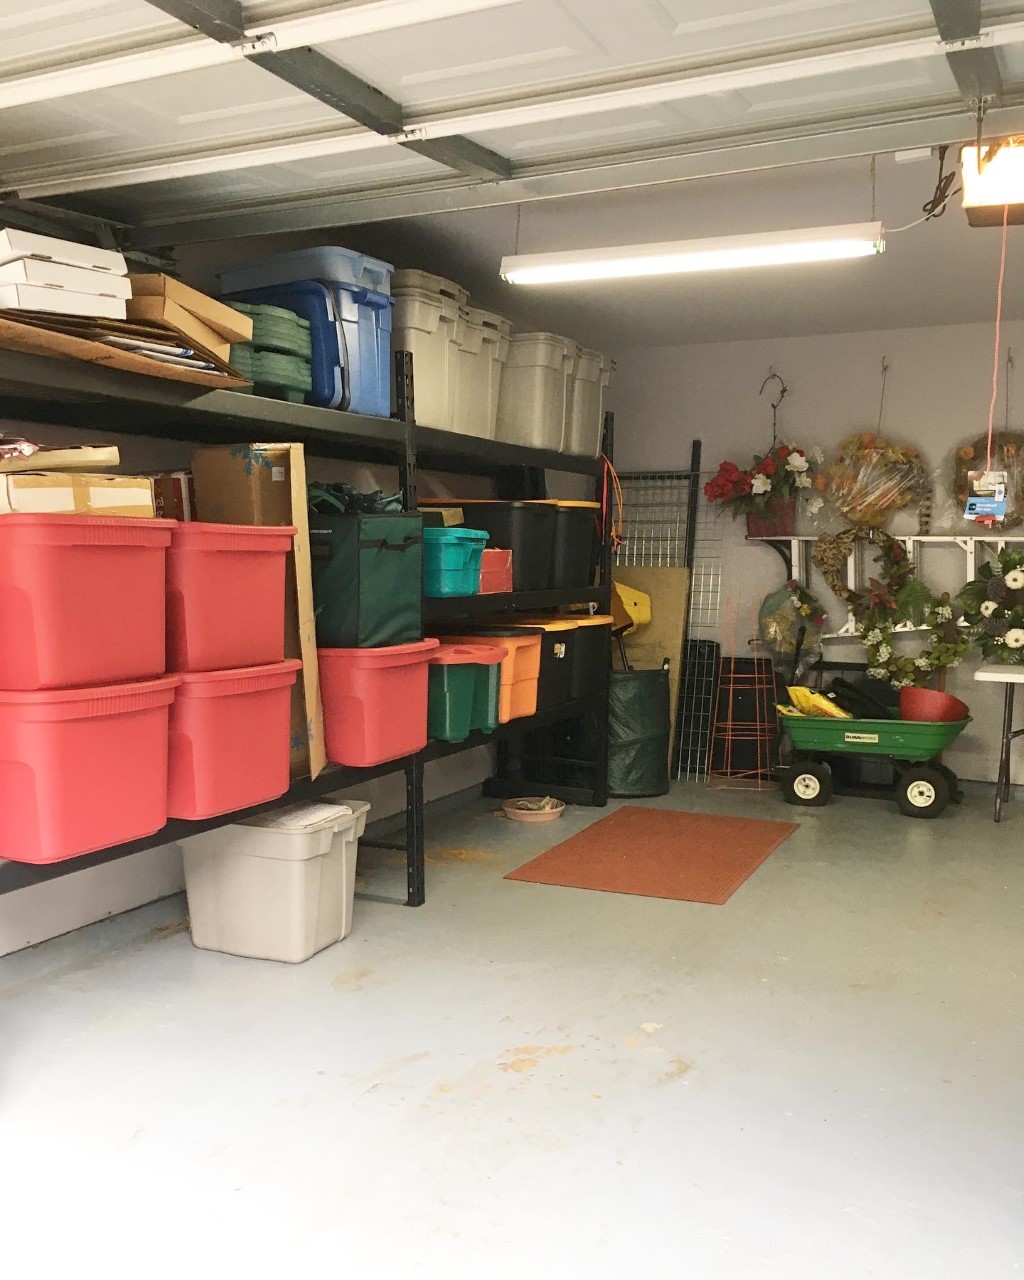 Katy home organizing services - garage after